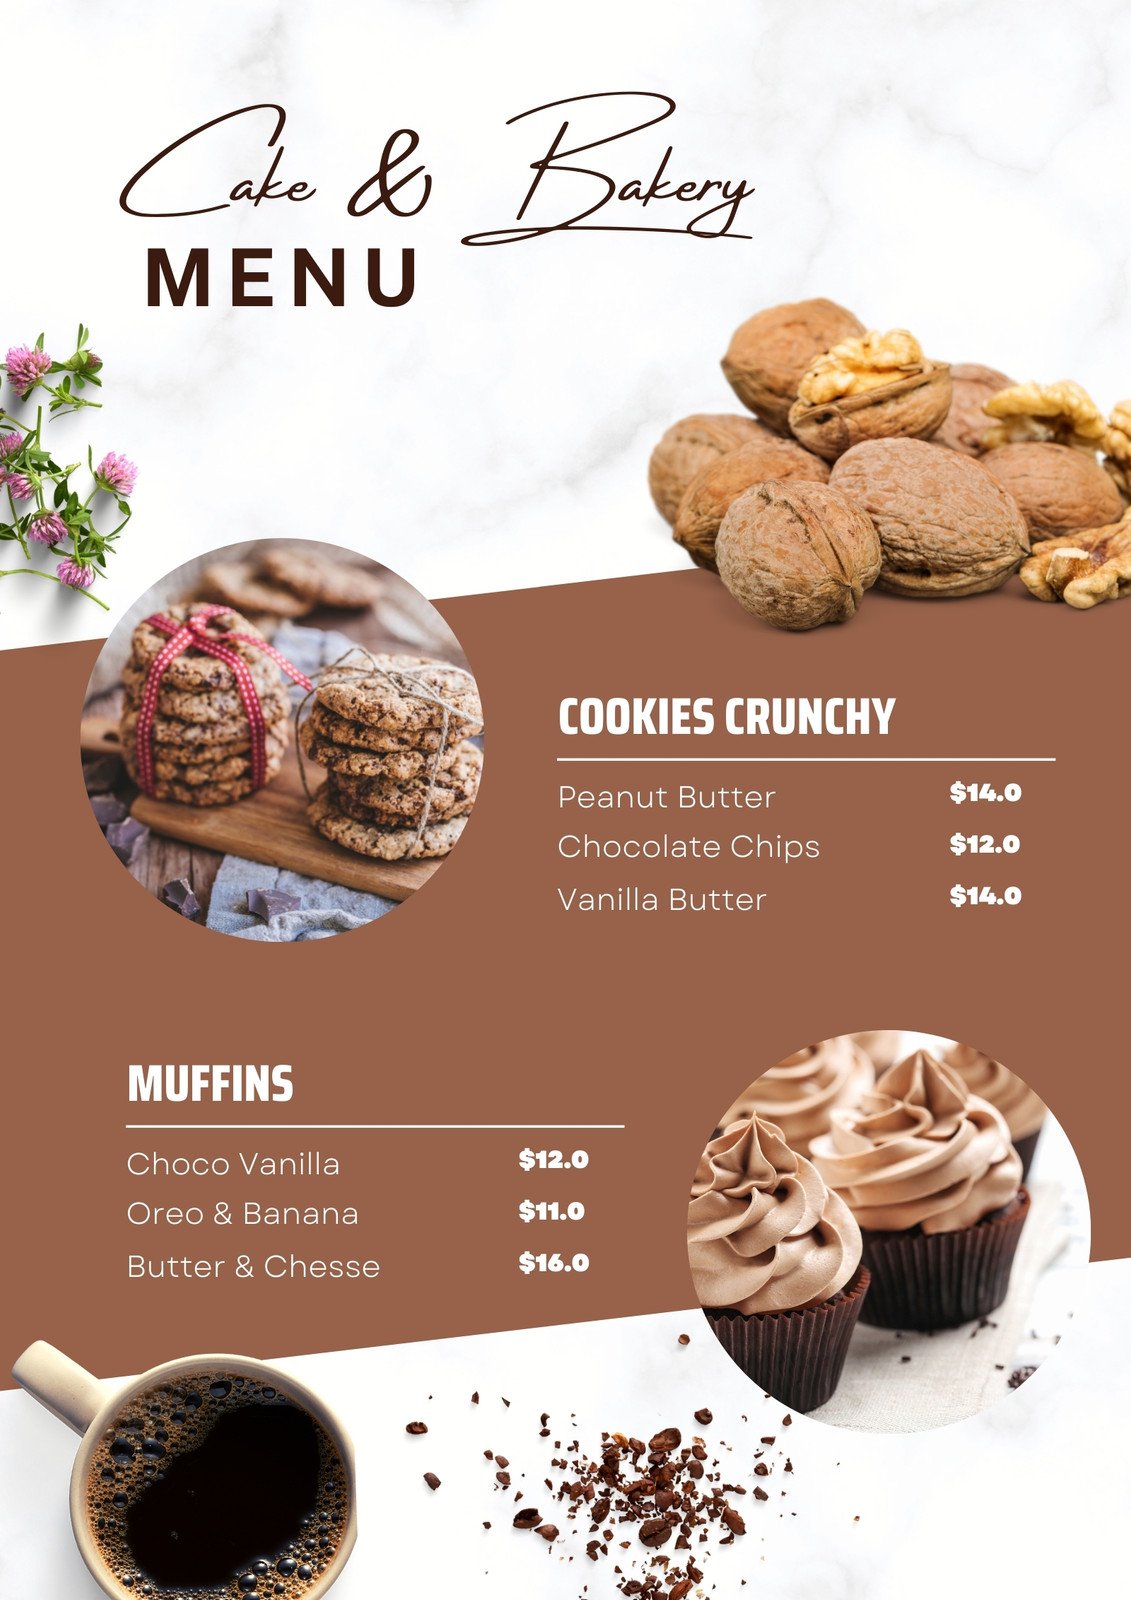 Free and Customizable Delectable Bakery Menu Templates | Canva | Bakery menu,  Bakery, Desserts menu